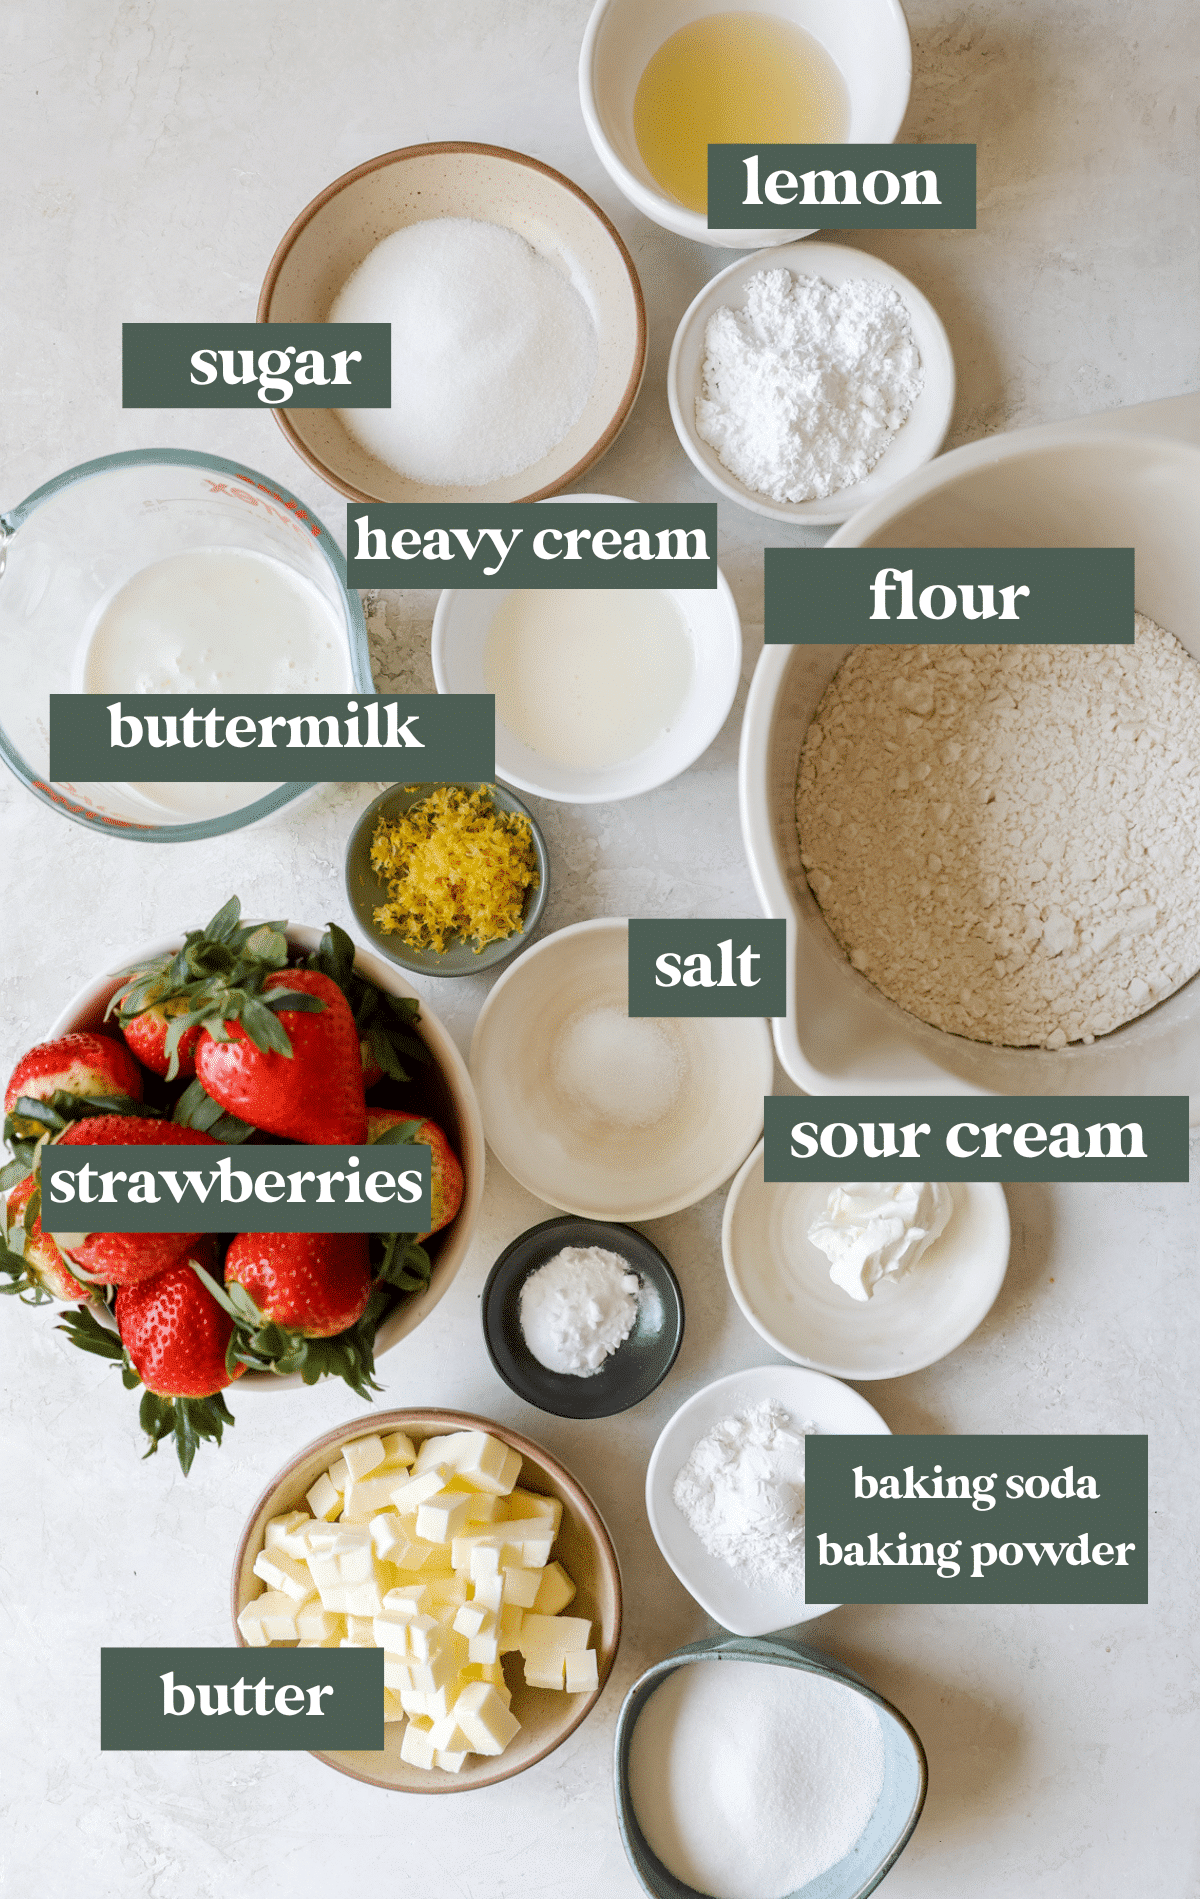 ingredients in small glass bowls needed to make shortcakes. 